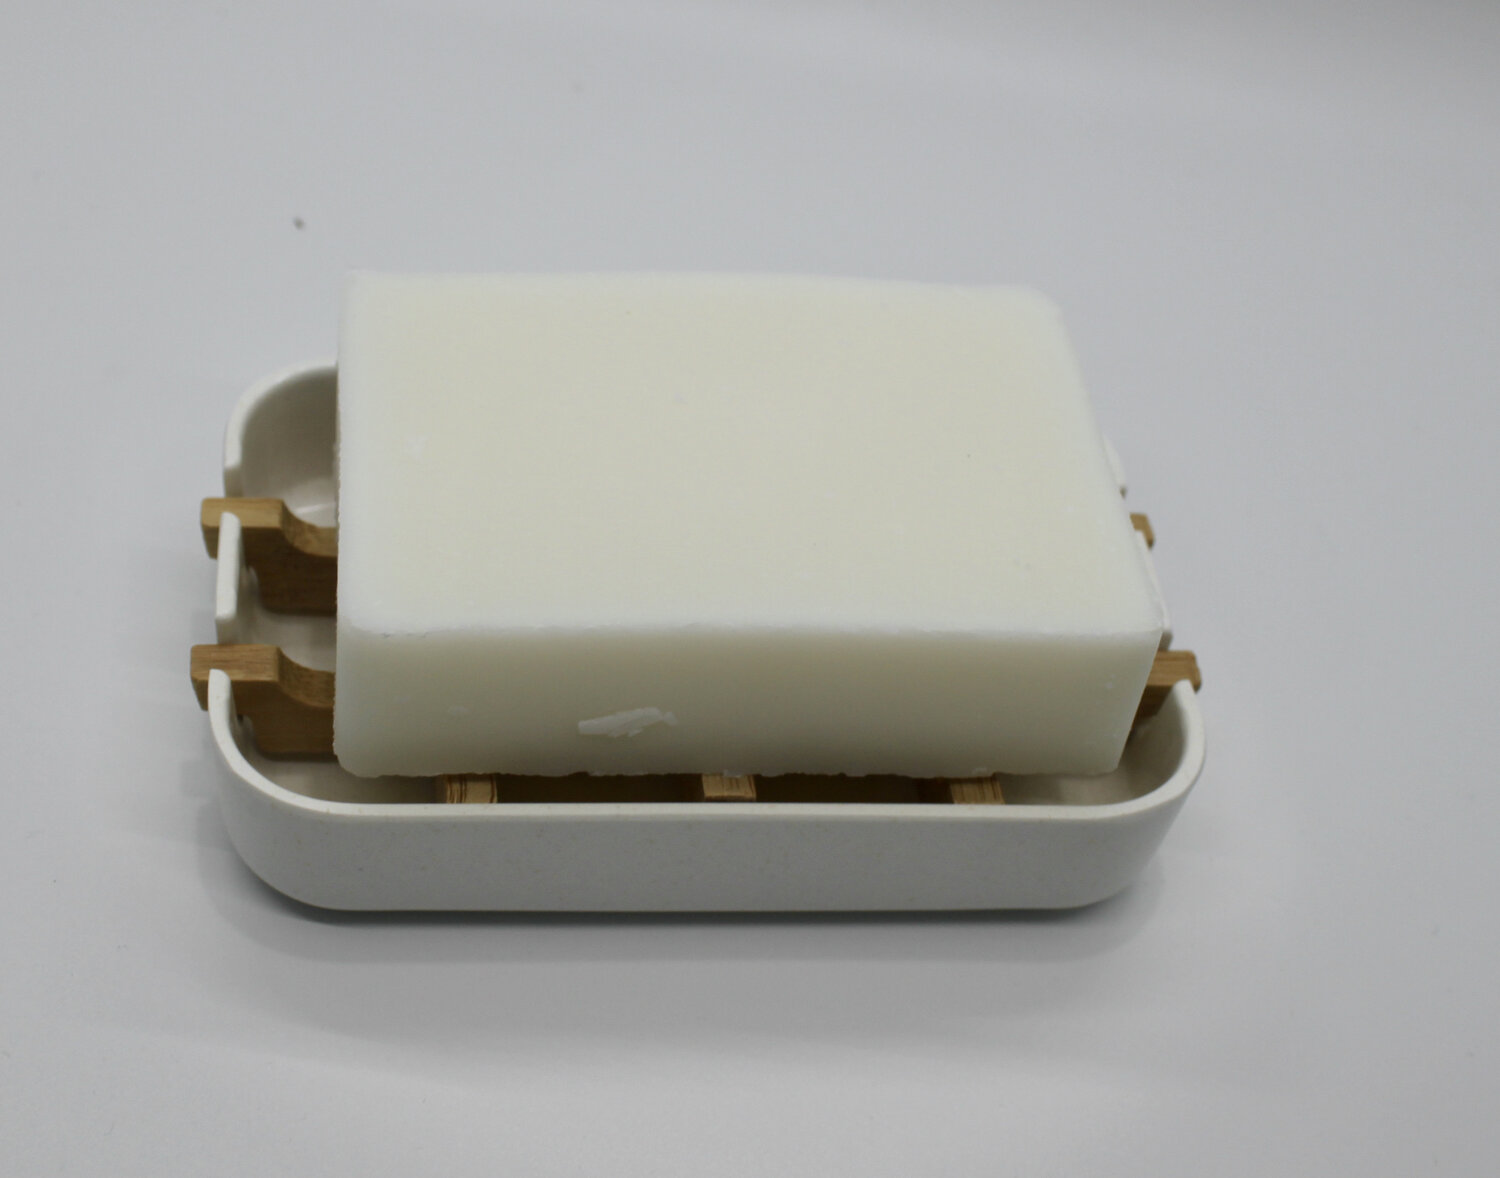 Compostable, Biodegradable, Bamboo and Corn Starch Draining Soap